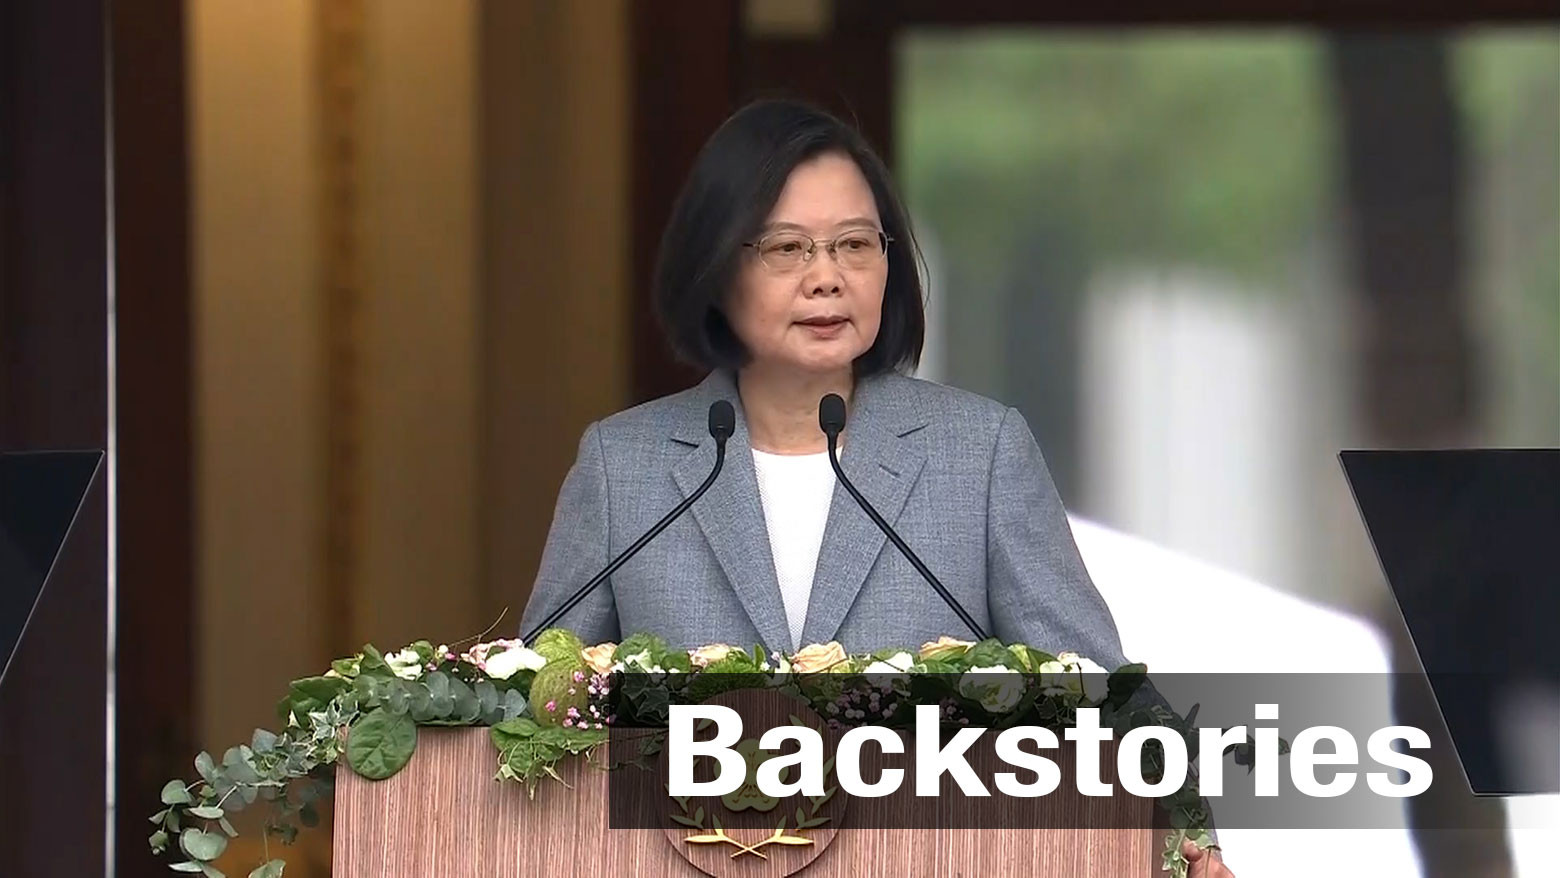 Taiwan’s President Tsai Ing-wen outlines challenges as she begins 2nd term